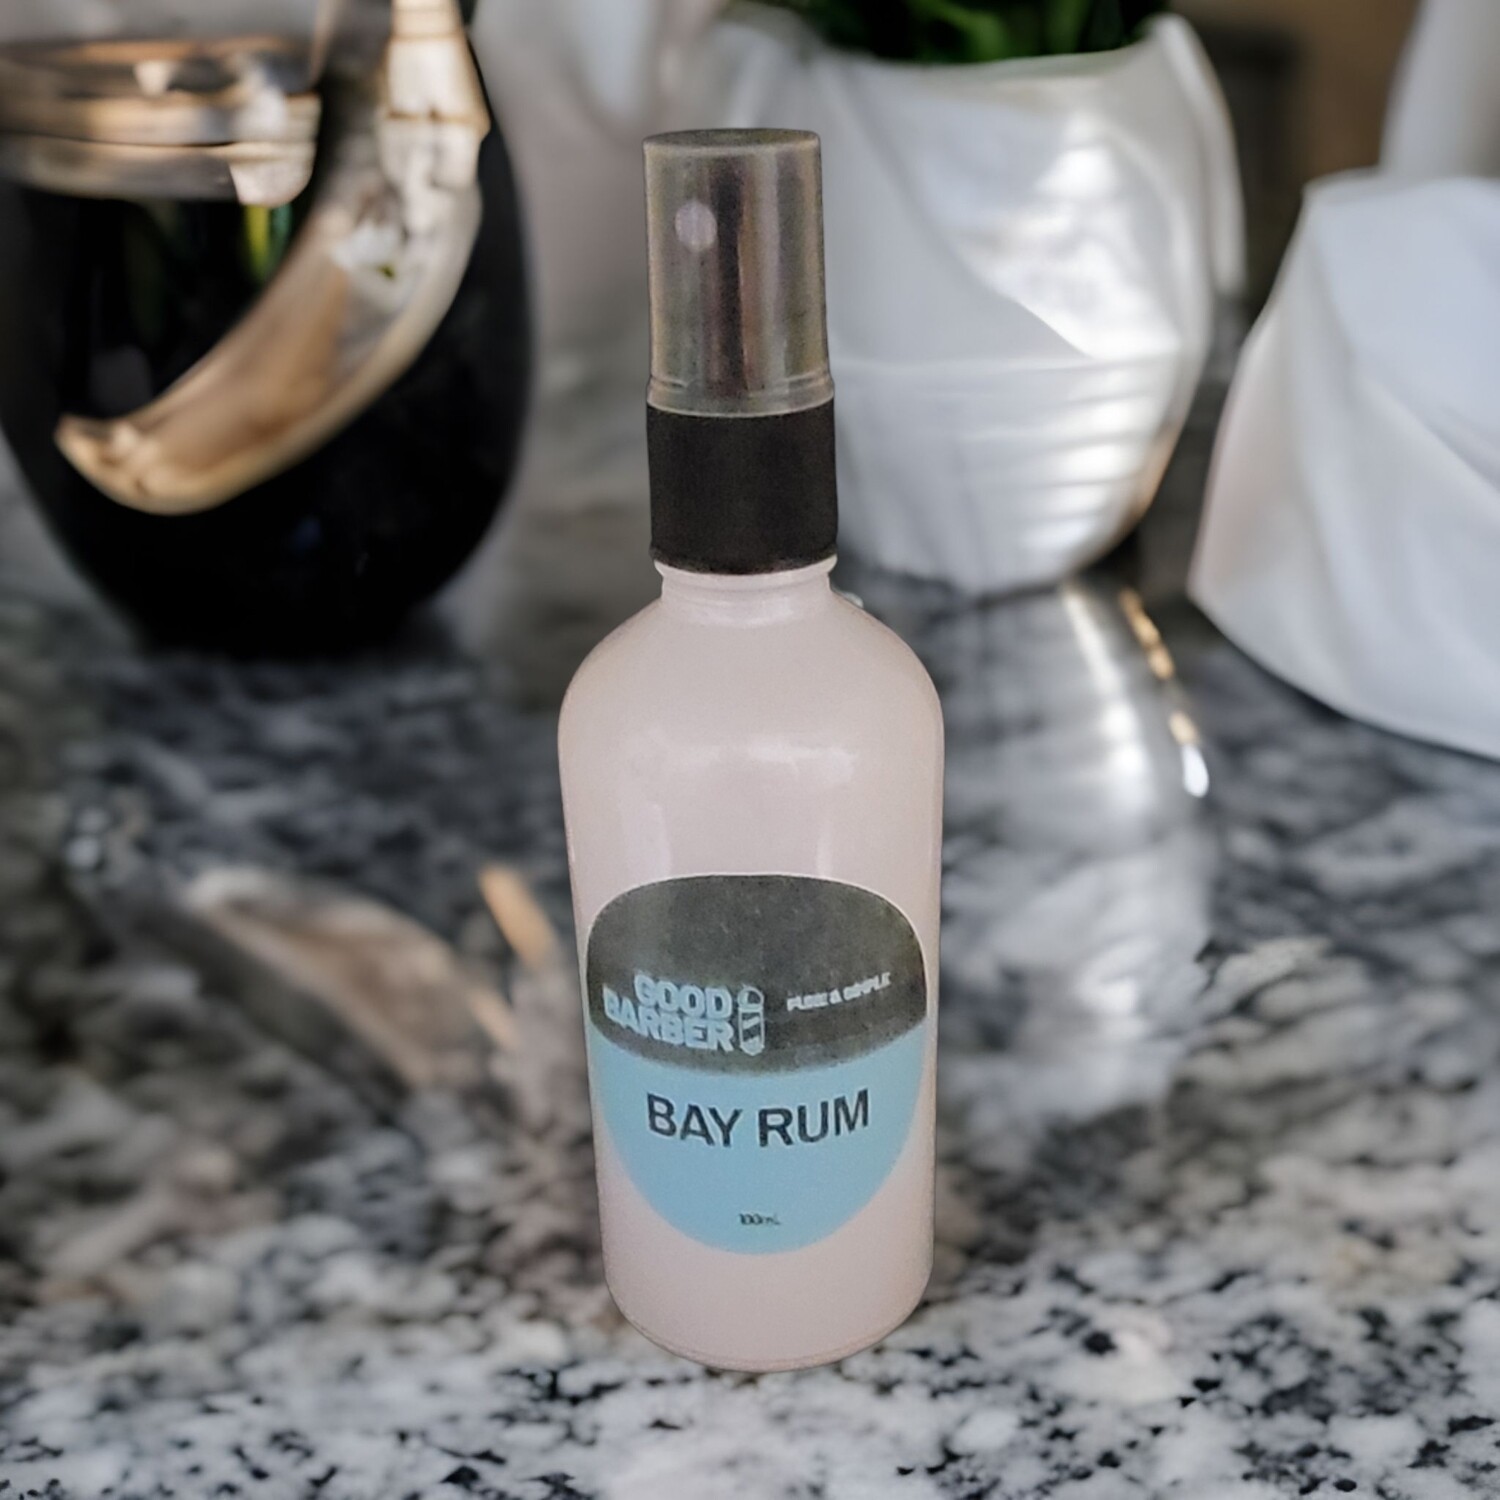 AFTER SHAVE - GOOD BARBERS BAY RUM  100mL PEARL WHITE Spray Bottle